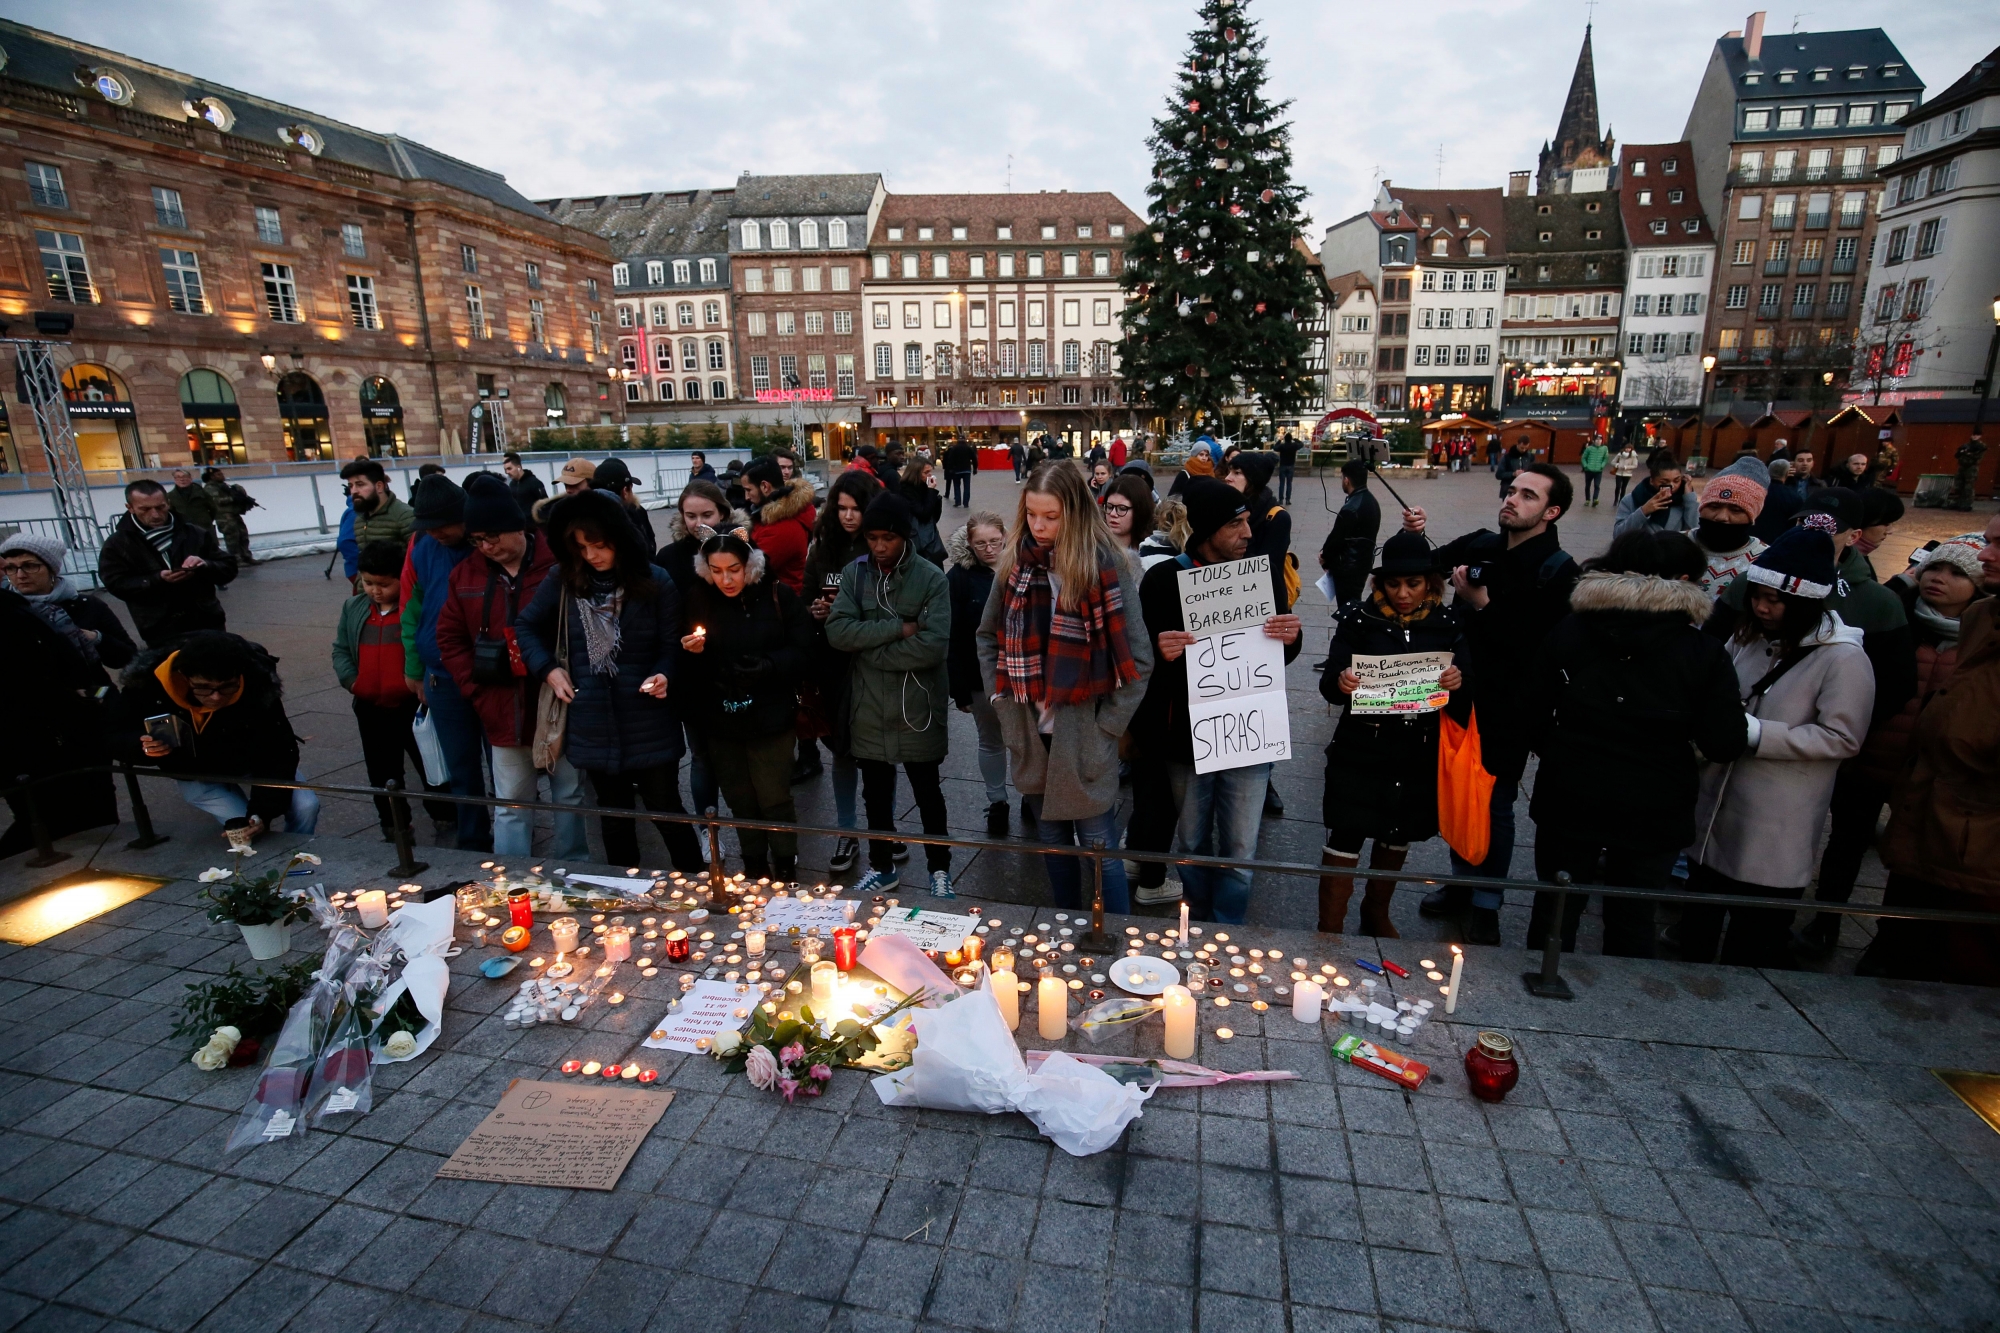 epa07226274 People light candles and leave signs and flowers on a place close to the Christmas Market where a shooting happened in Strasbourg, France, 12 December 2018. According to latest reports, three people were killed and several injured when a gunman opened fire at the Strasbourg Christmas market a day earlier. The suspect is reported to be at large and the motive for the attack is still unclear.  EPA/RONALD WITTEK FRANCE SHOOTING AFTERMATH